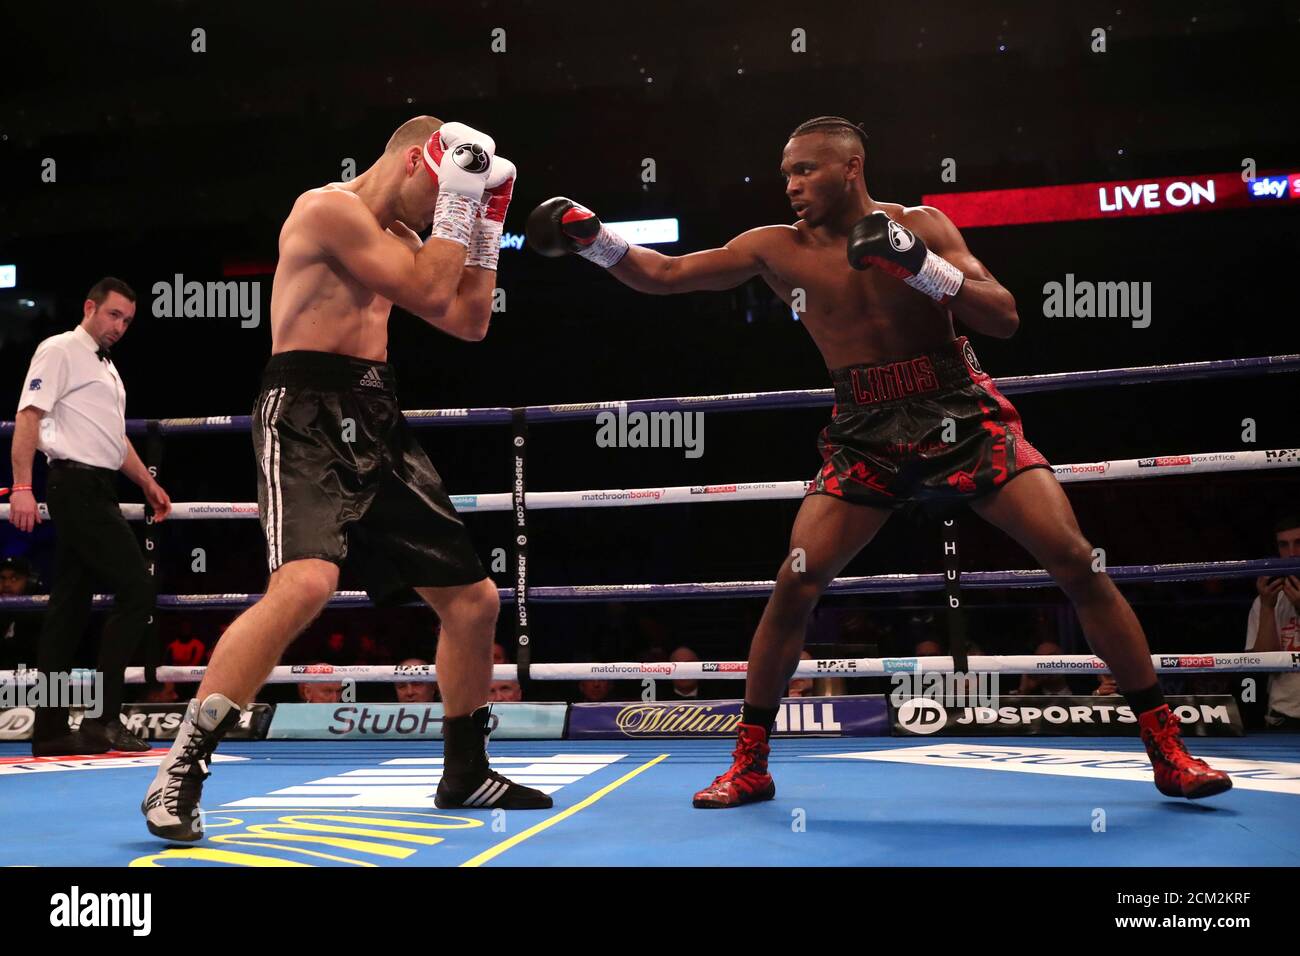 Boxing - Fabio Wardley v Phil Williams - The O2 Arena, London, Britain -  December 22, 2018 Fabio Wardley in action against Phil Williams Action  Images via Reuters/Peter Cziborra Stock Photo - Alamy